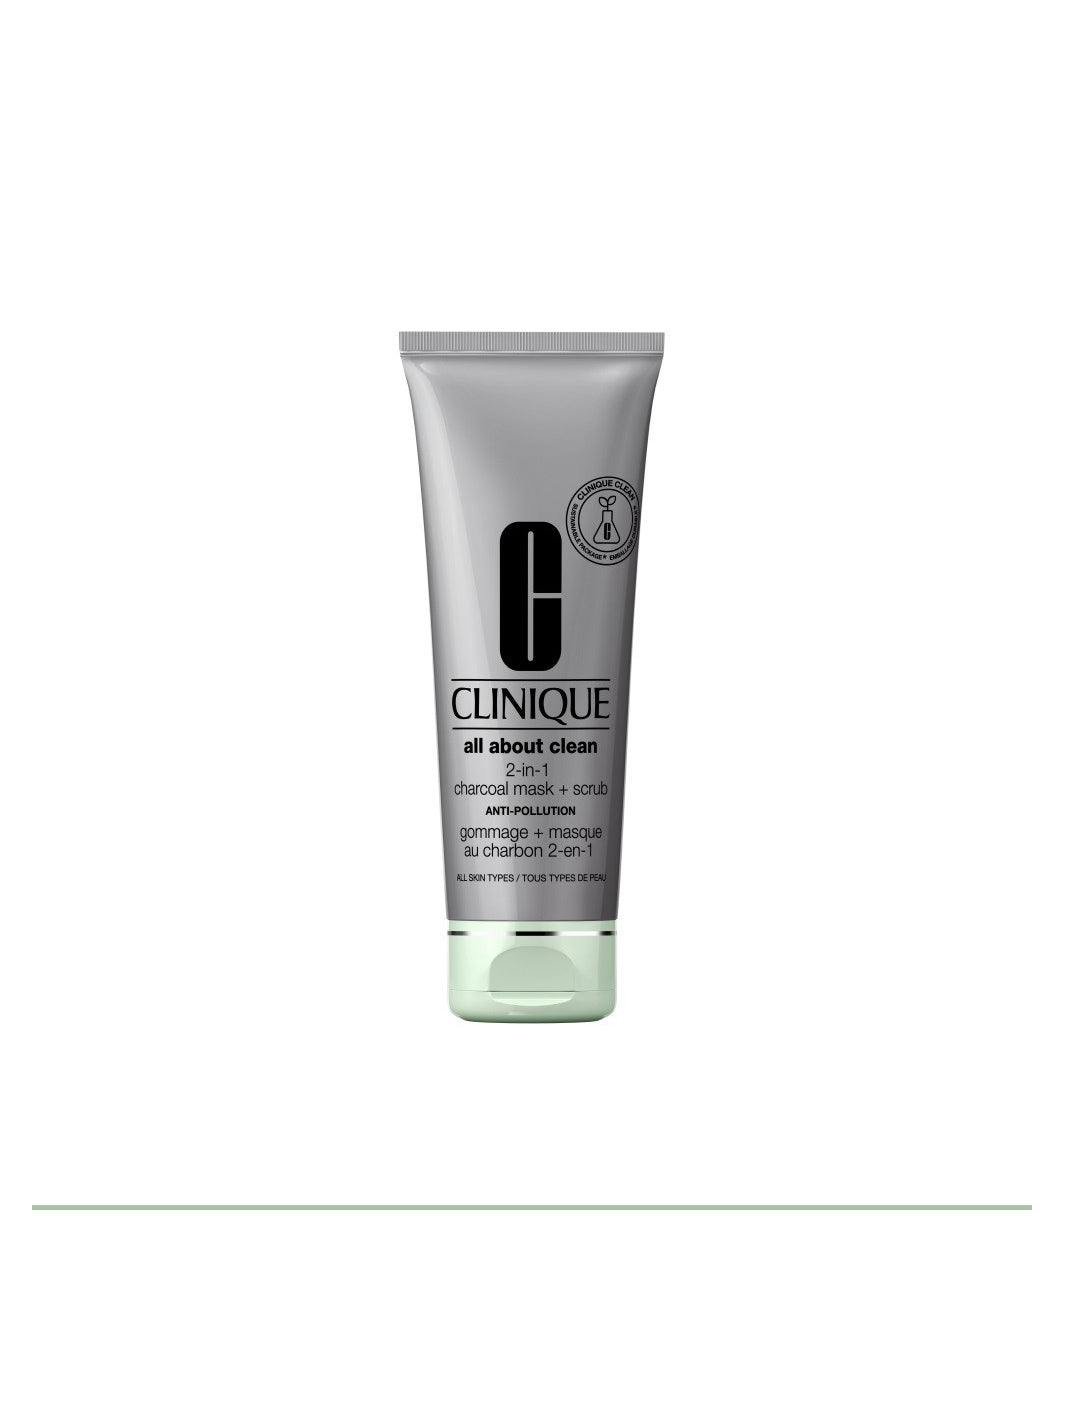 Clinique All about clean charcoal mask + scrub